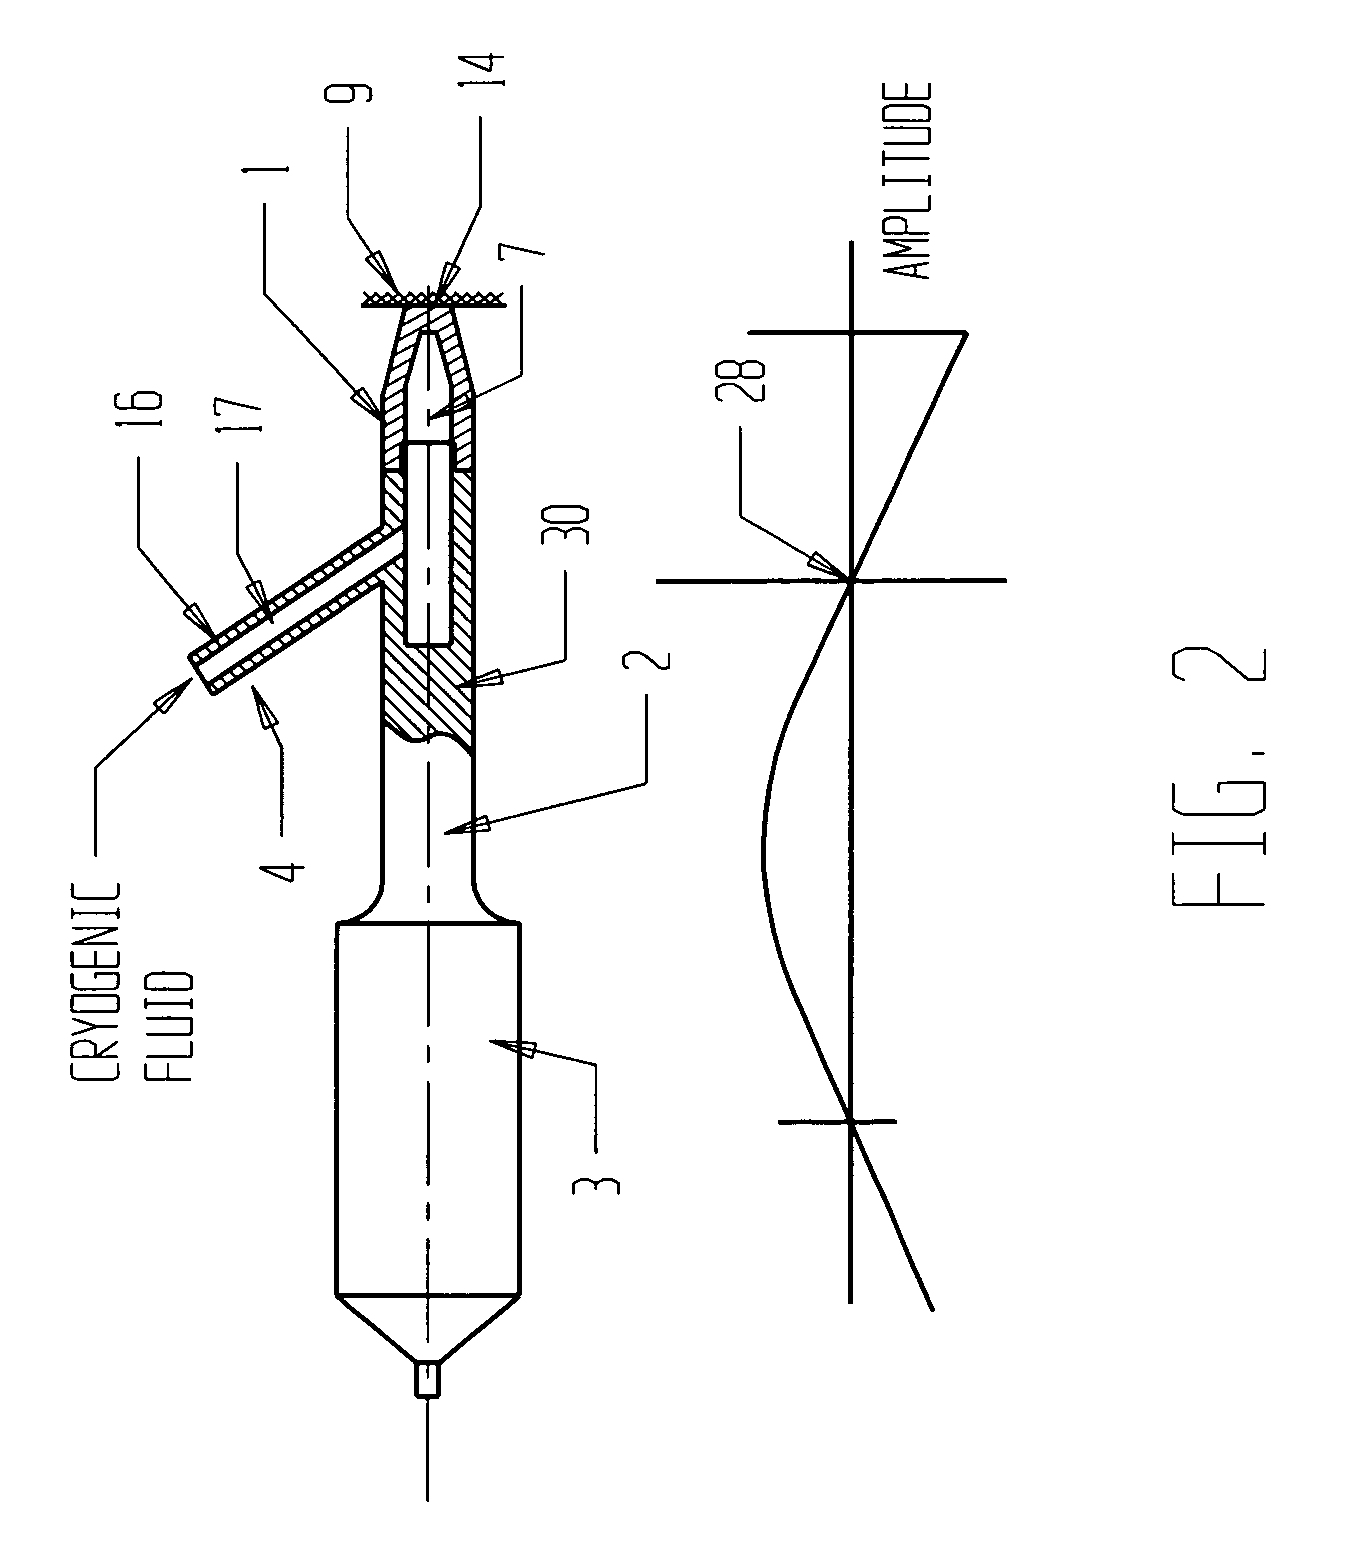 Apparatus and methods for the selective removal of tissue using combinations of ultrasonic energy and cryogenic energy